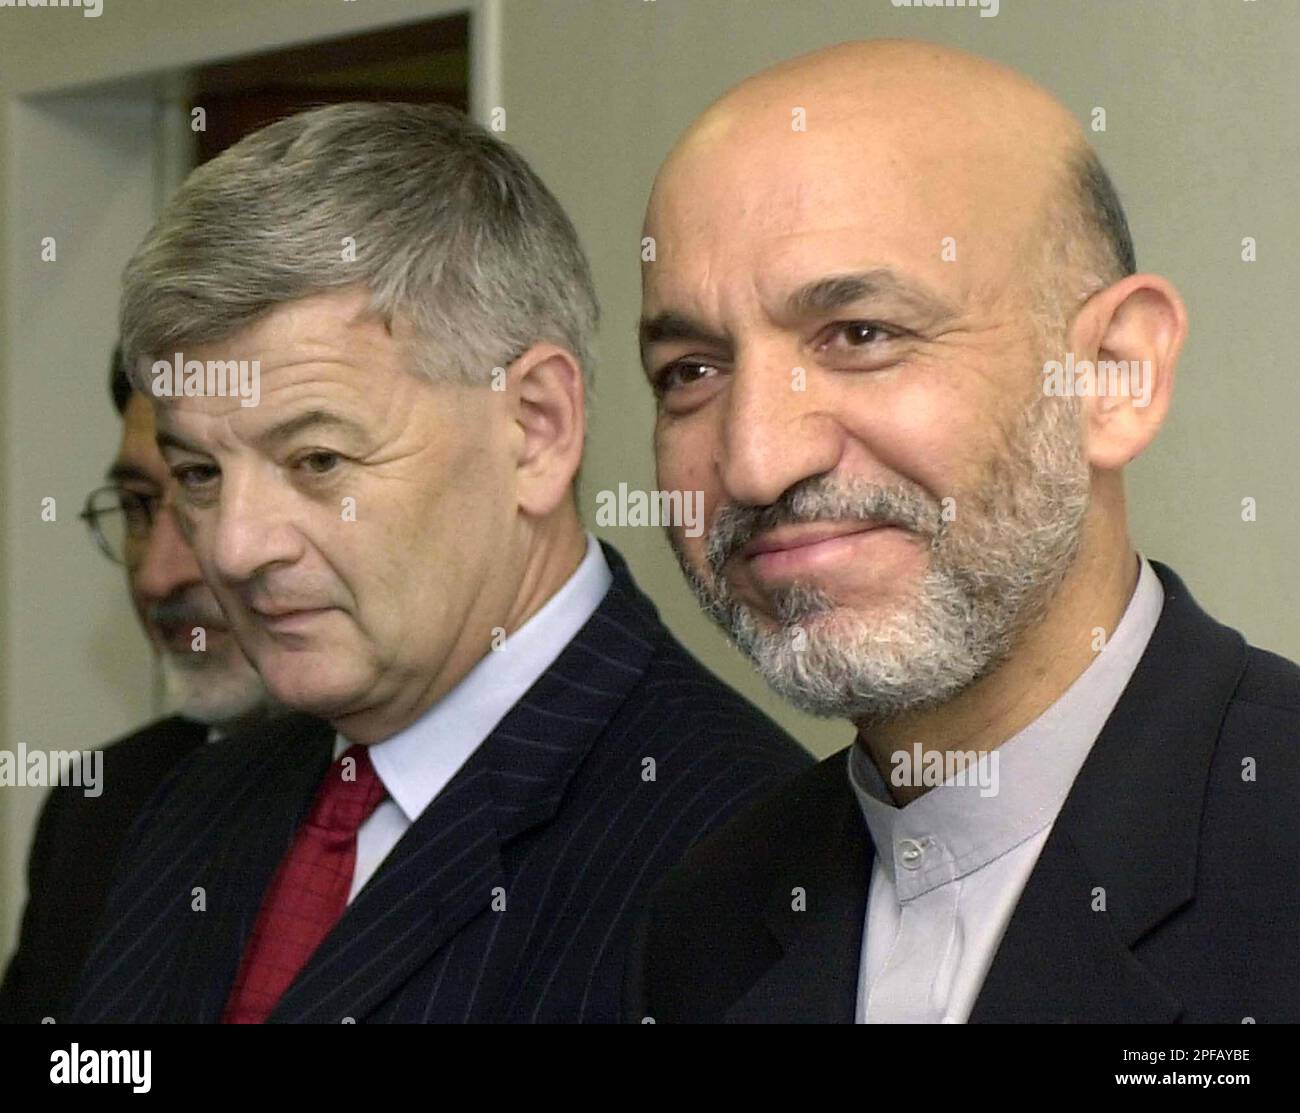 Afghan President Hamid Karzai, right, smiles after he was welcomed by German Foreign Minister Joschka Fischer, left, after he arrived at the U.S. Rhein Main Air Base, at the southern end of Frankfurt international airport, Germany, Sunday, Sept. 8, 2002. In his first trip since an attempt on his life three days ago, Karzai stopped over in Germany on his way to the United States where he will attend the U.N. General Assembly debate and ceremonies marking the anniversary of the Sept. 11 terrorist attacks. (AP Photo/Pool/Oliver Berg) Foto de stock